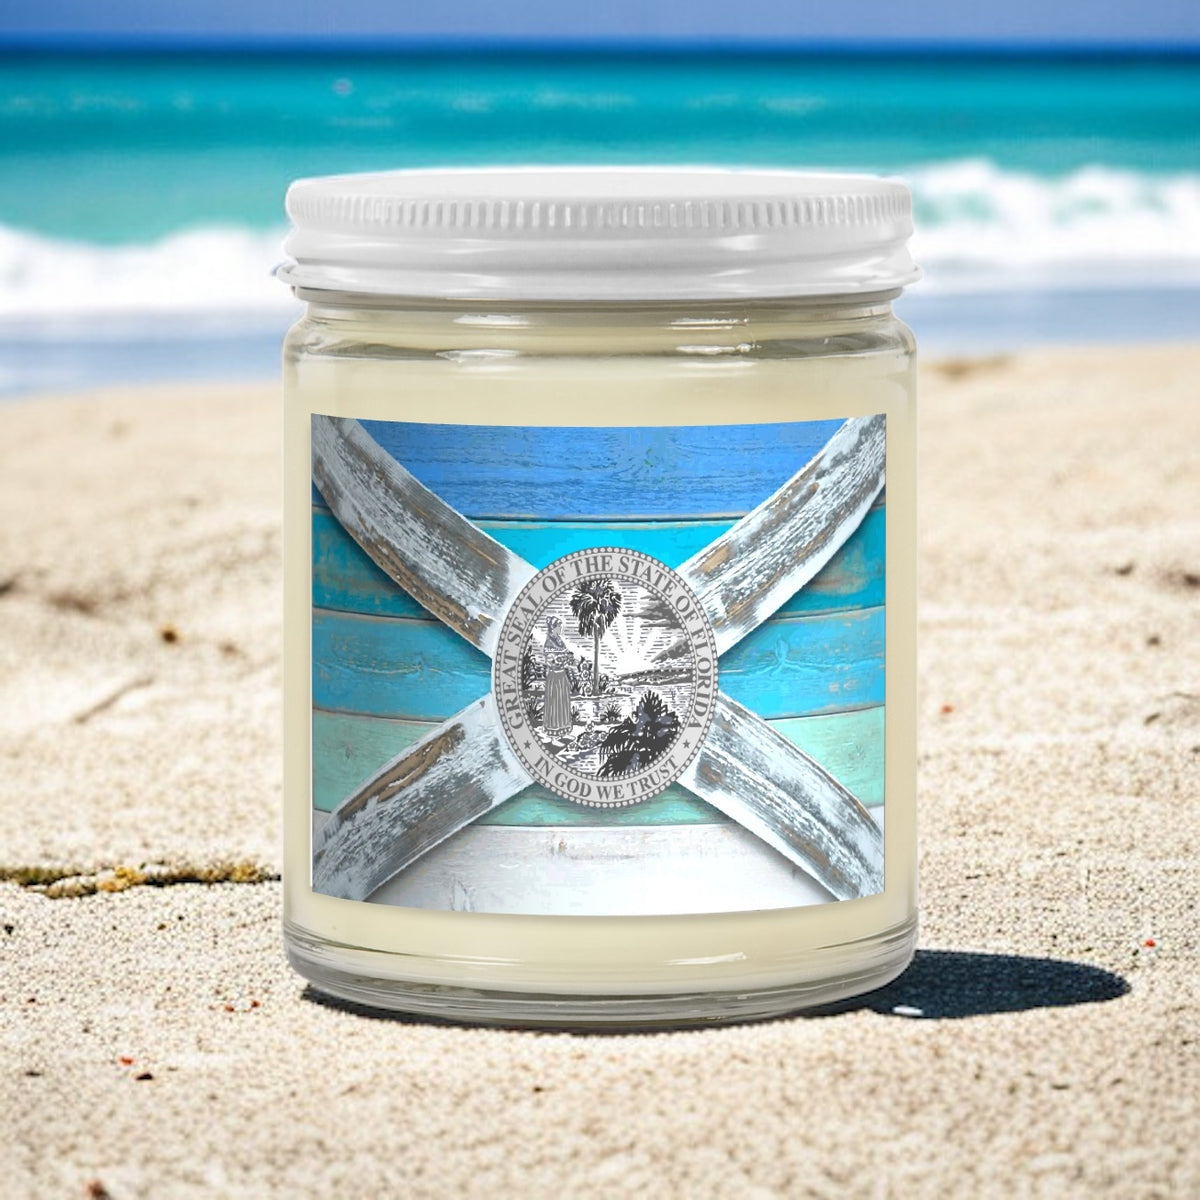 Bougie Beach Scented Soy Candle